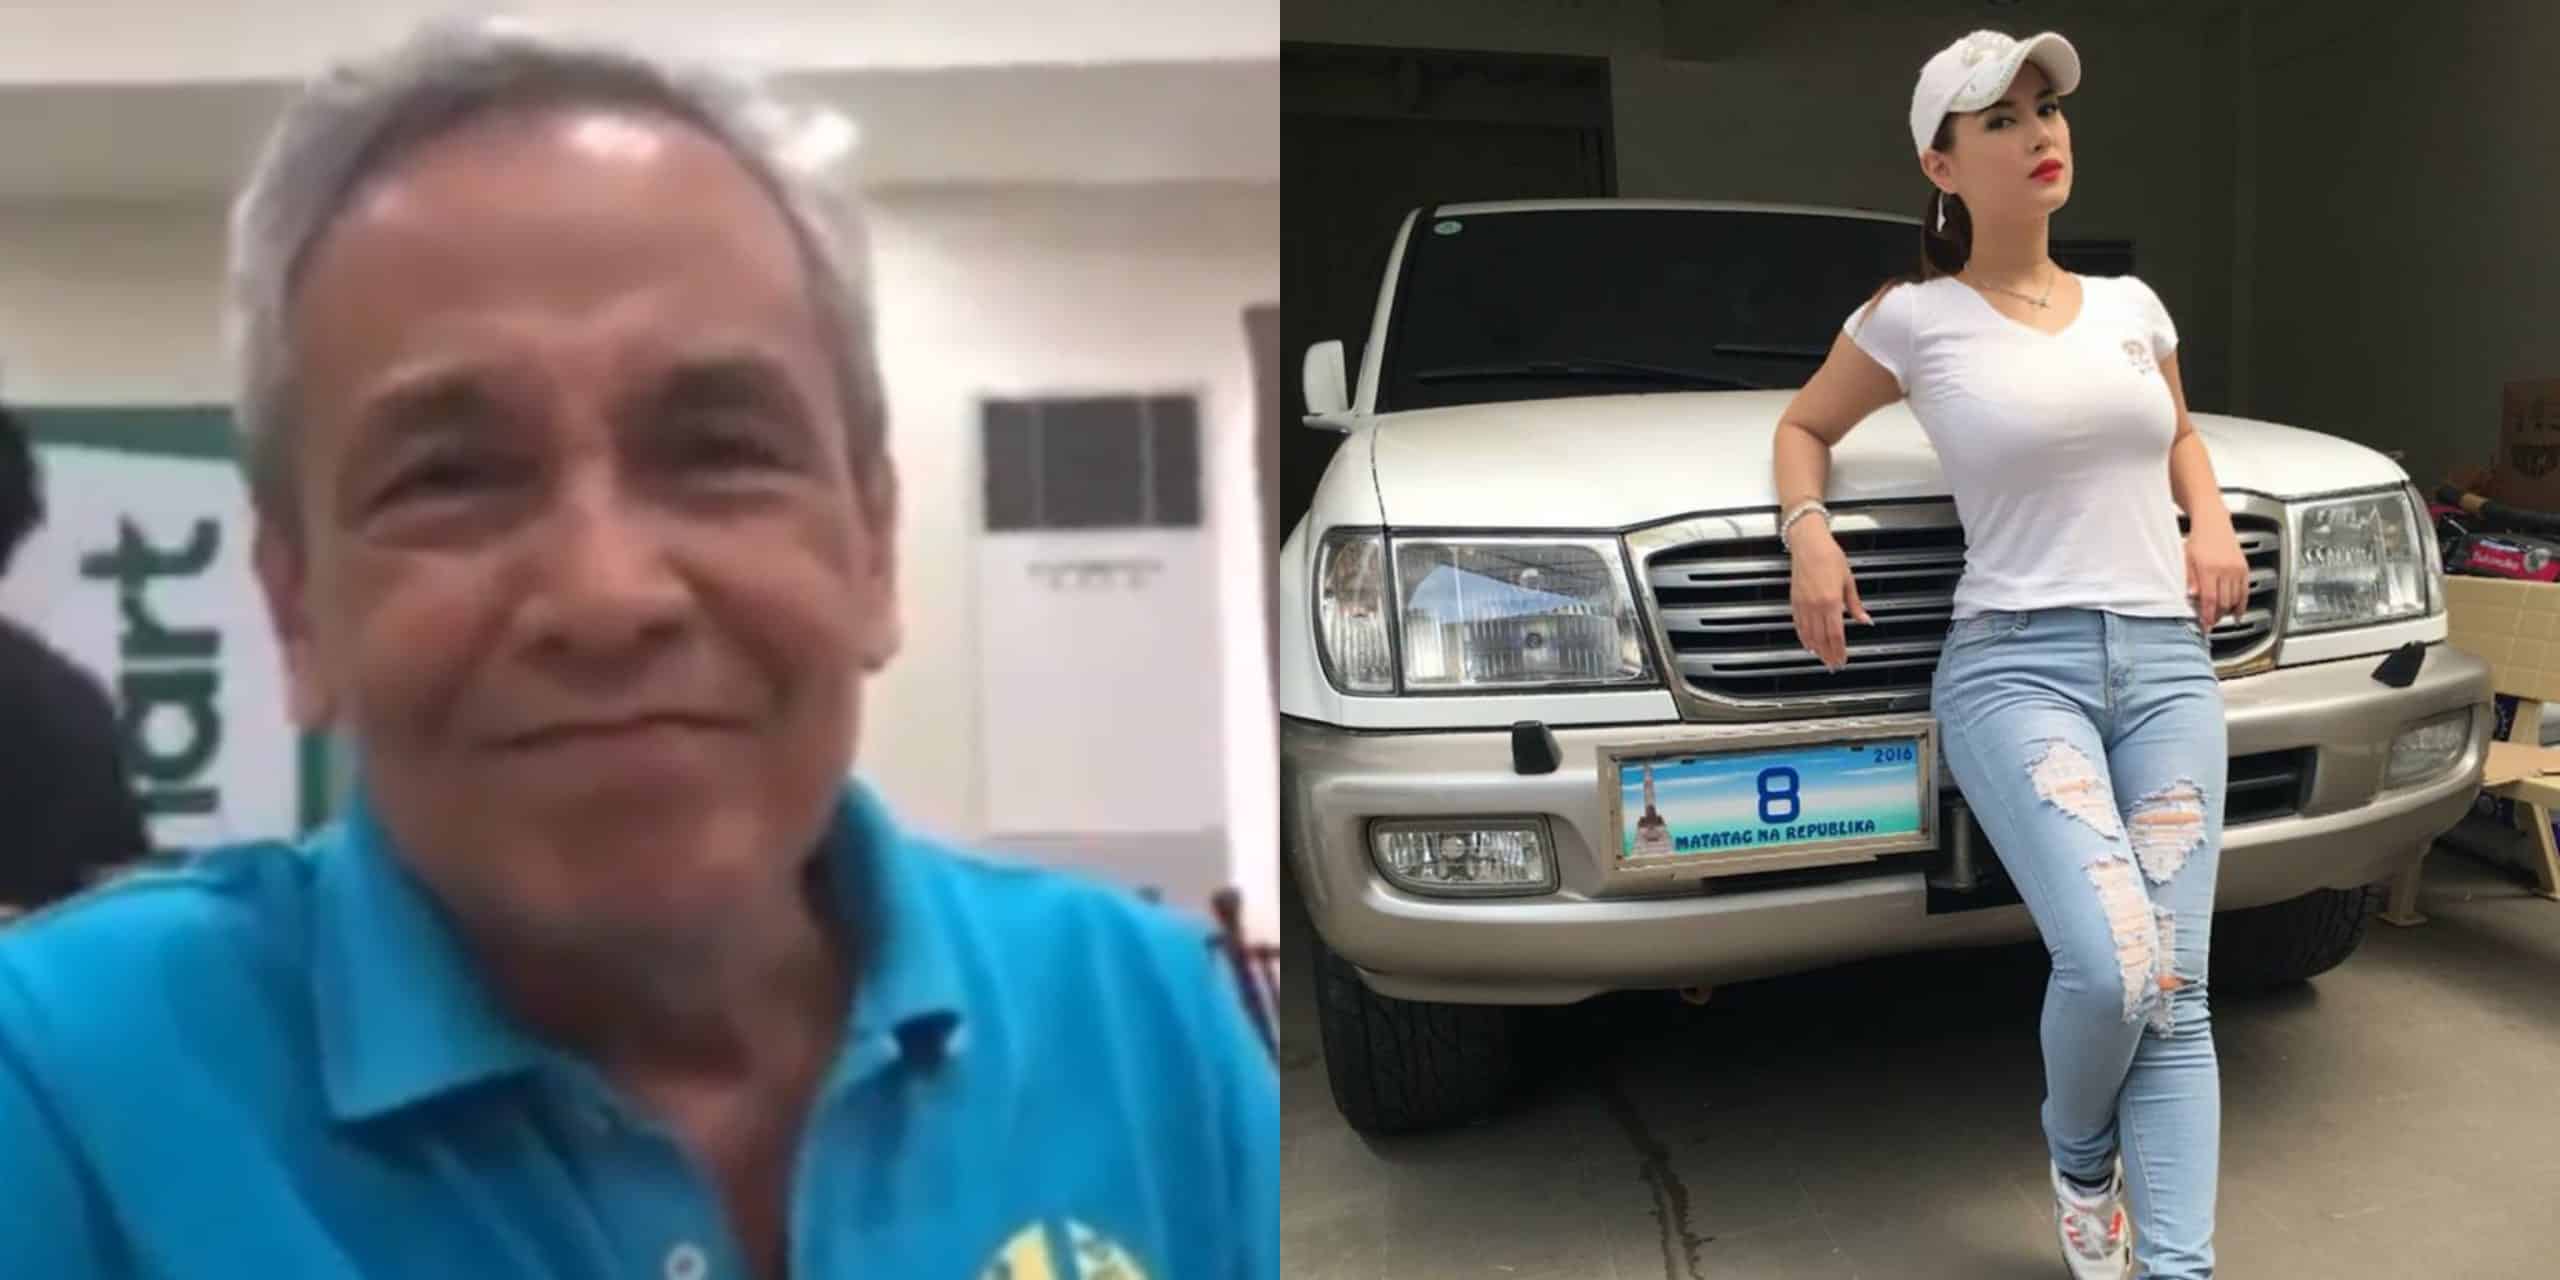 Maria Ozawa S Answer To Jim Paredes On Instagram Captured The Attention Of Some Netizens